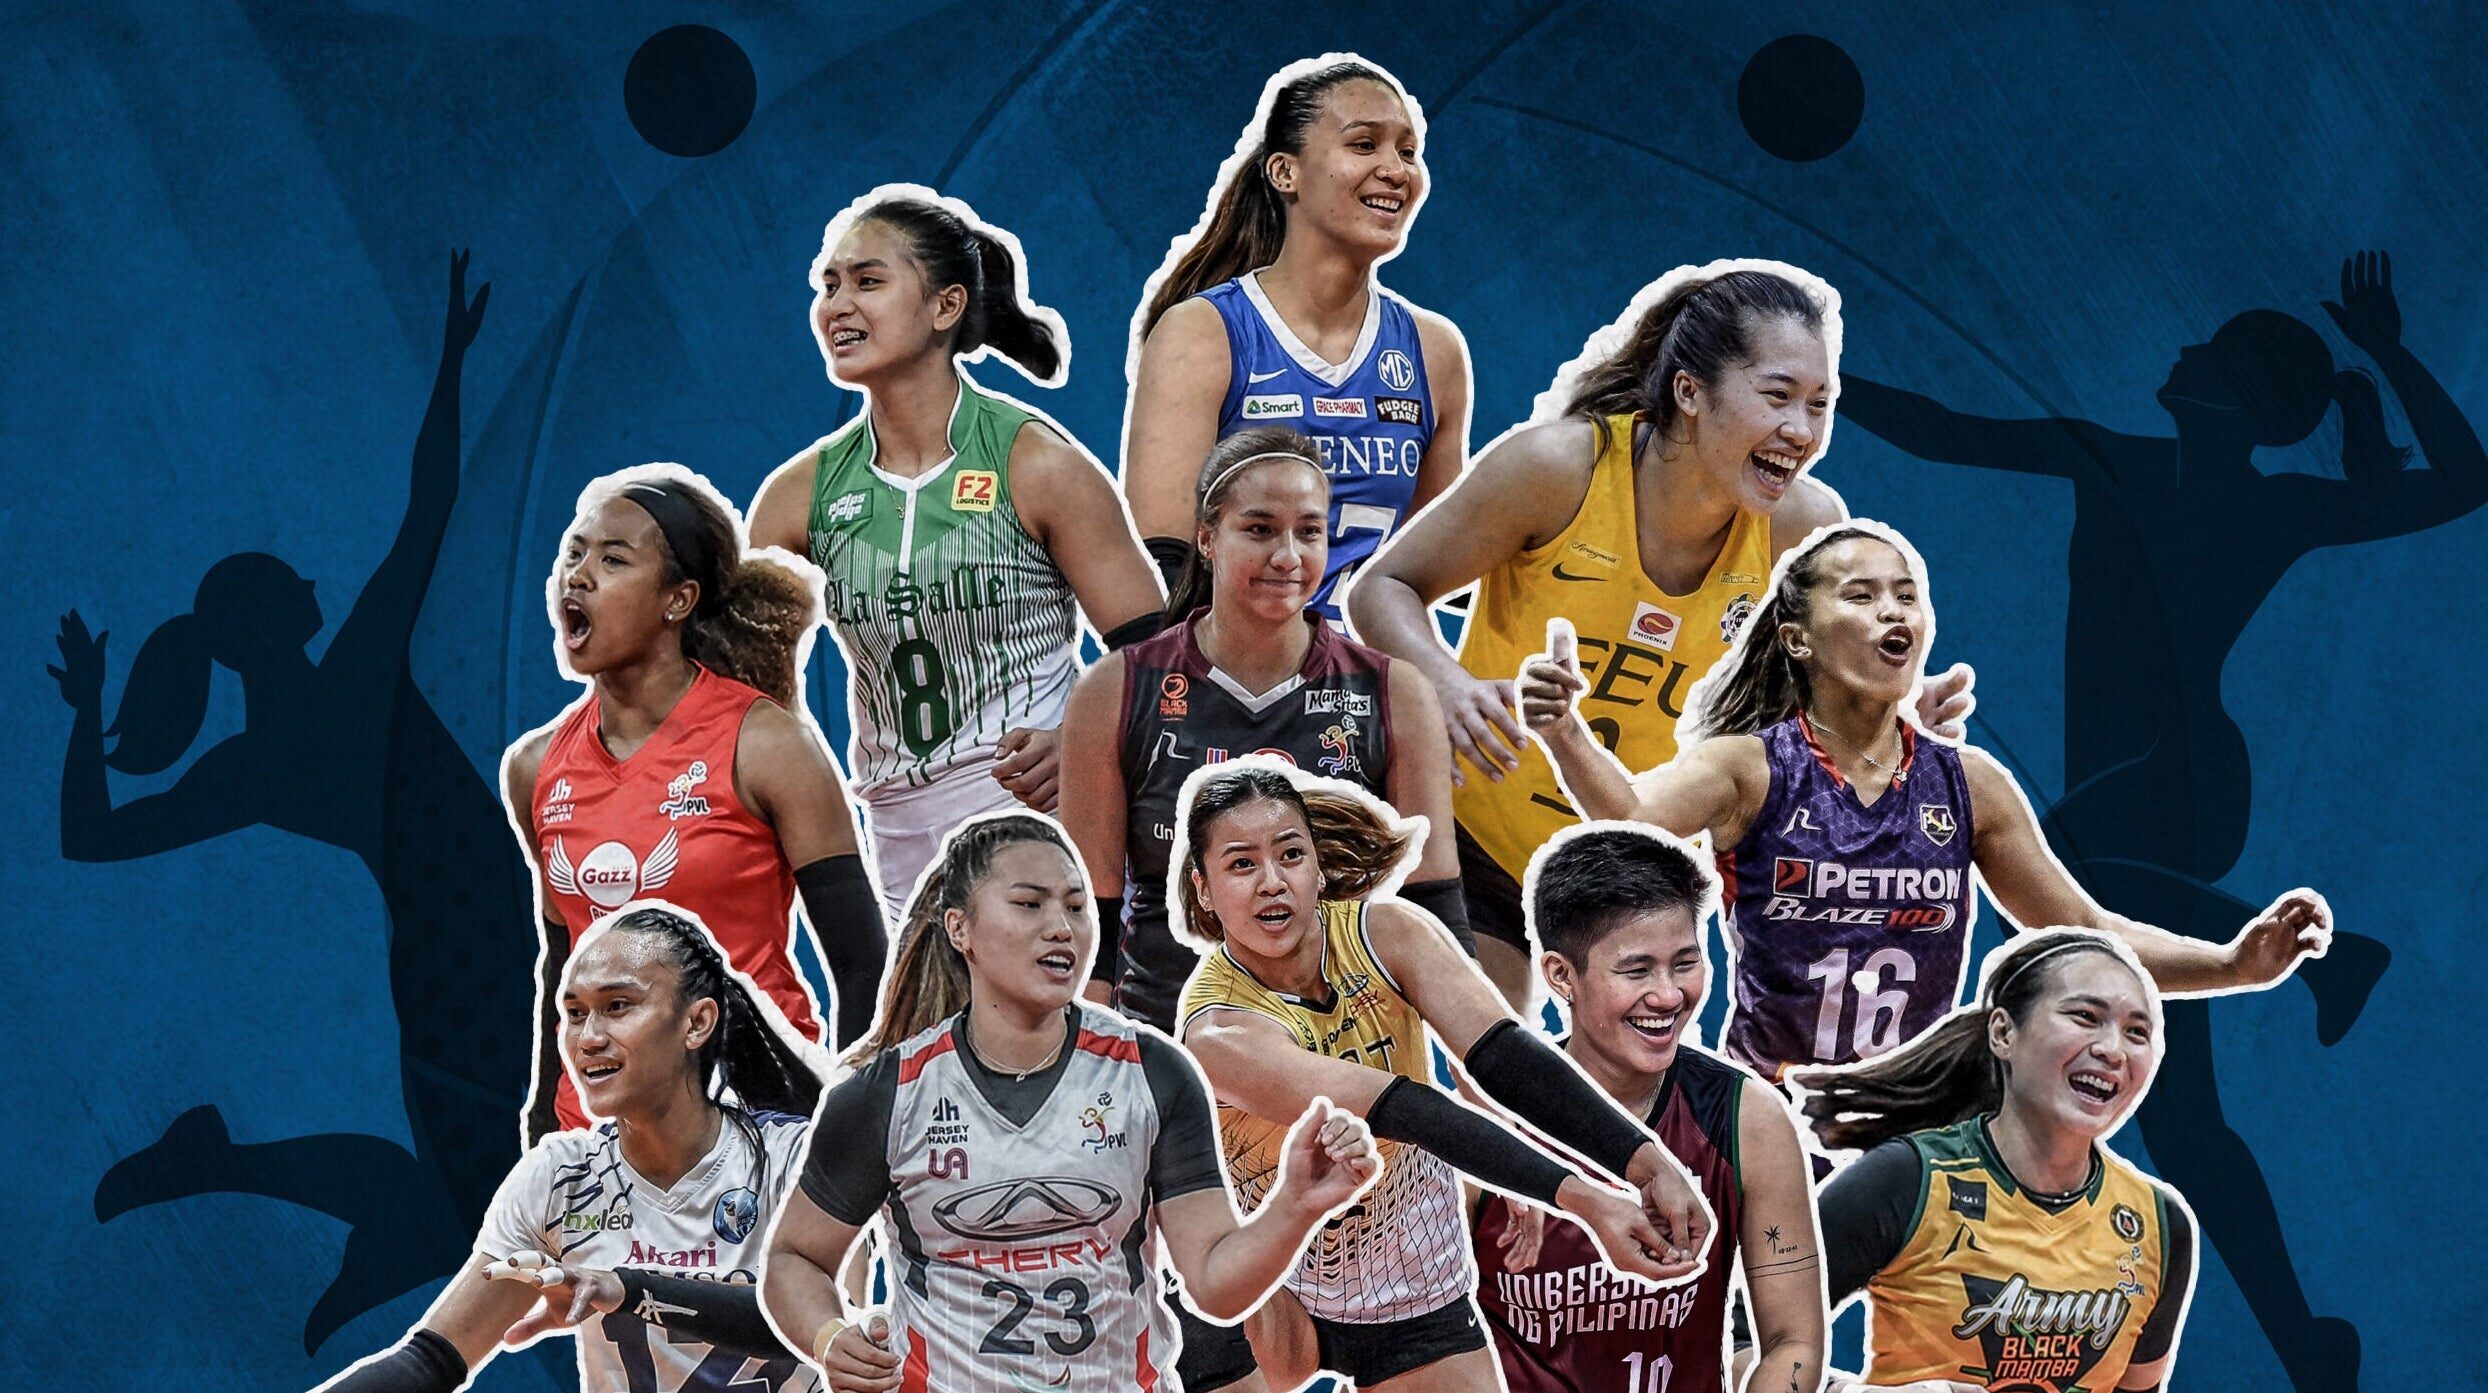 PVL 11 most anticipated players in the 2023 Invitational Conference